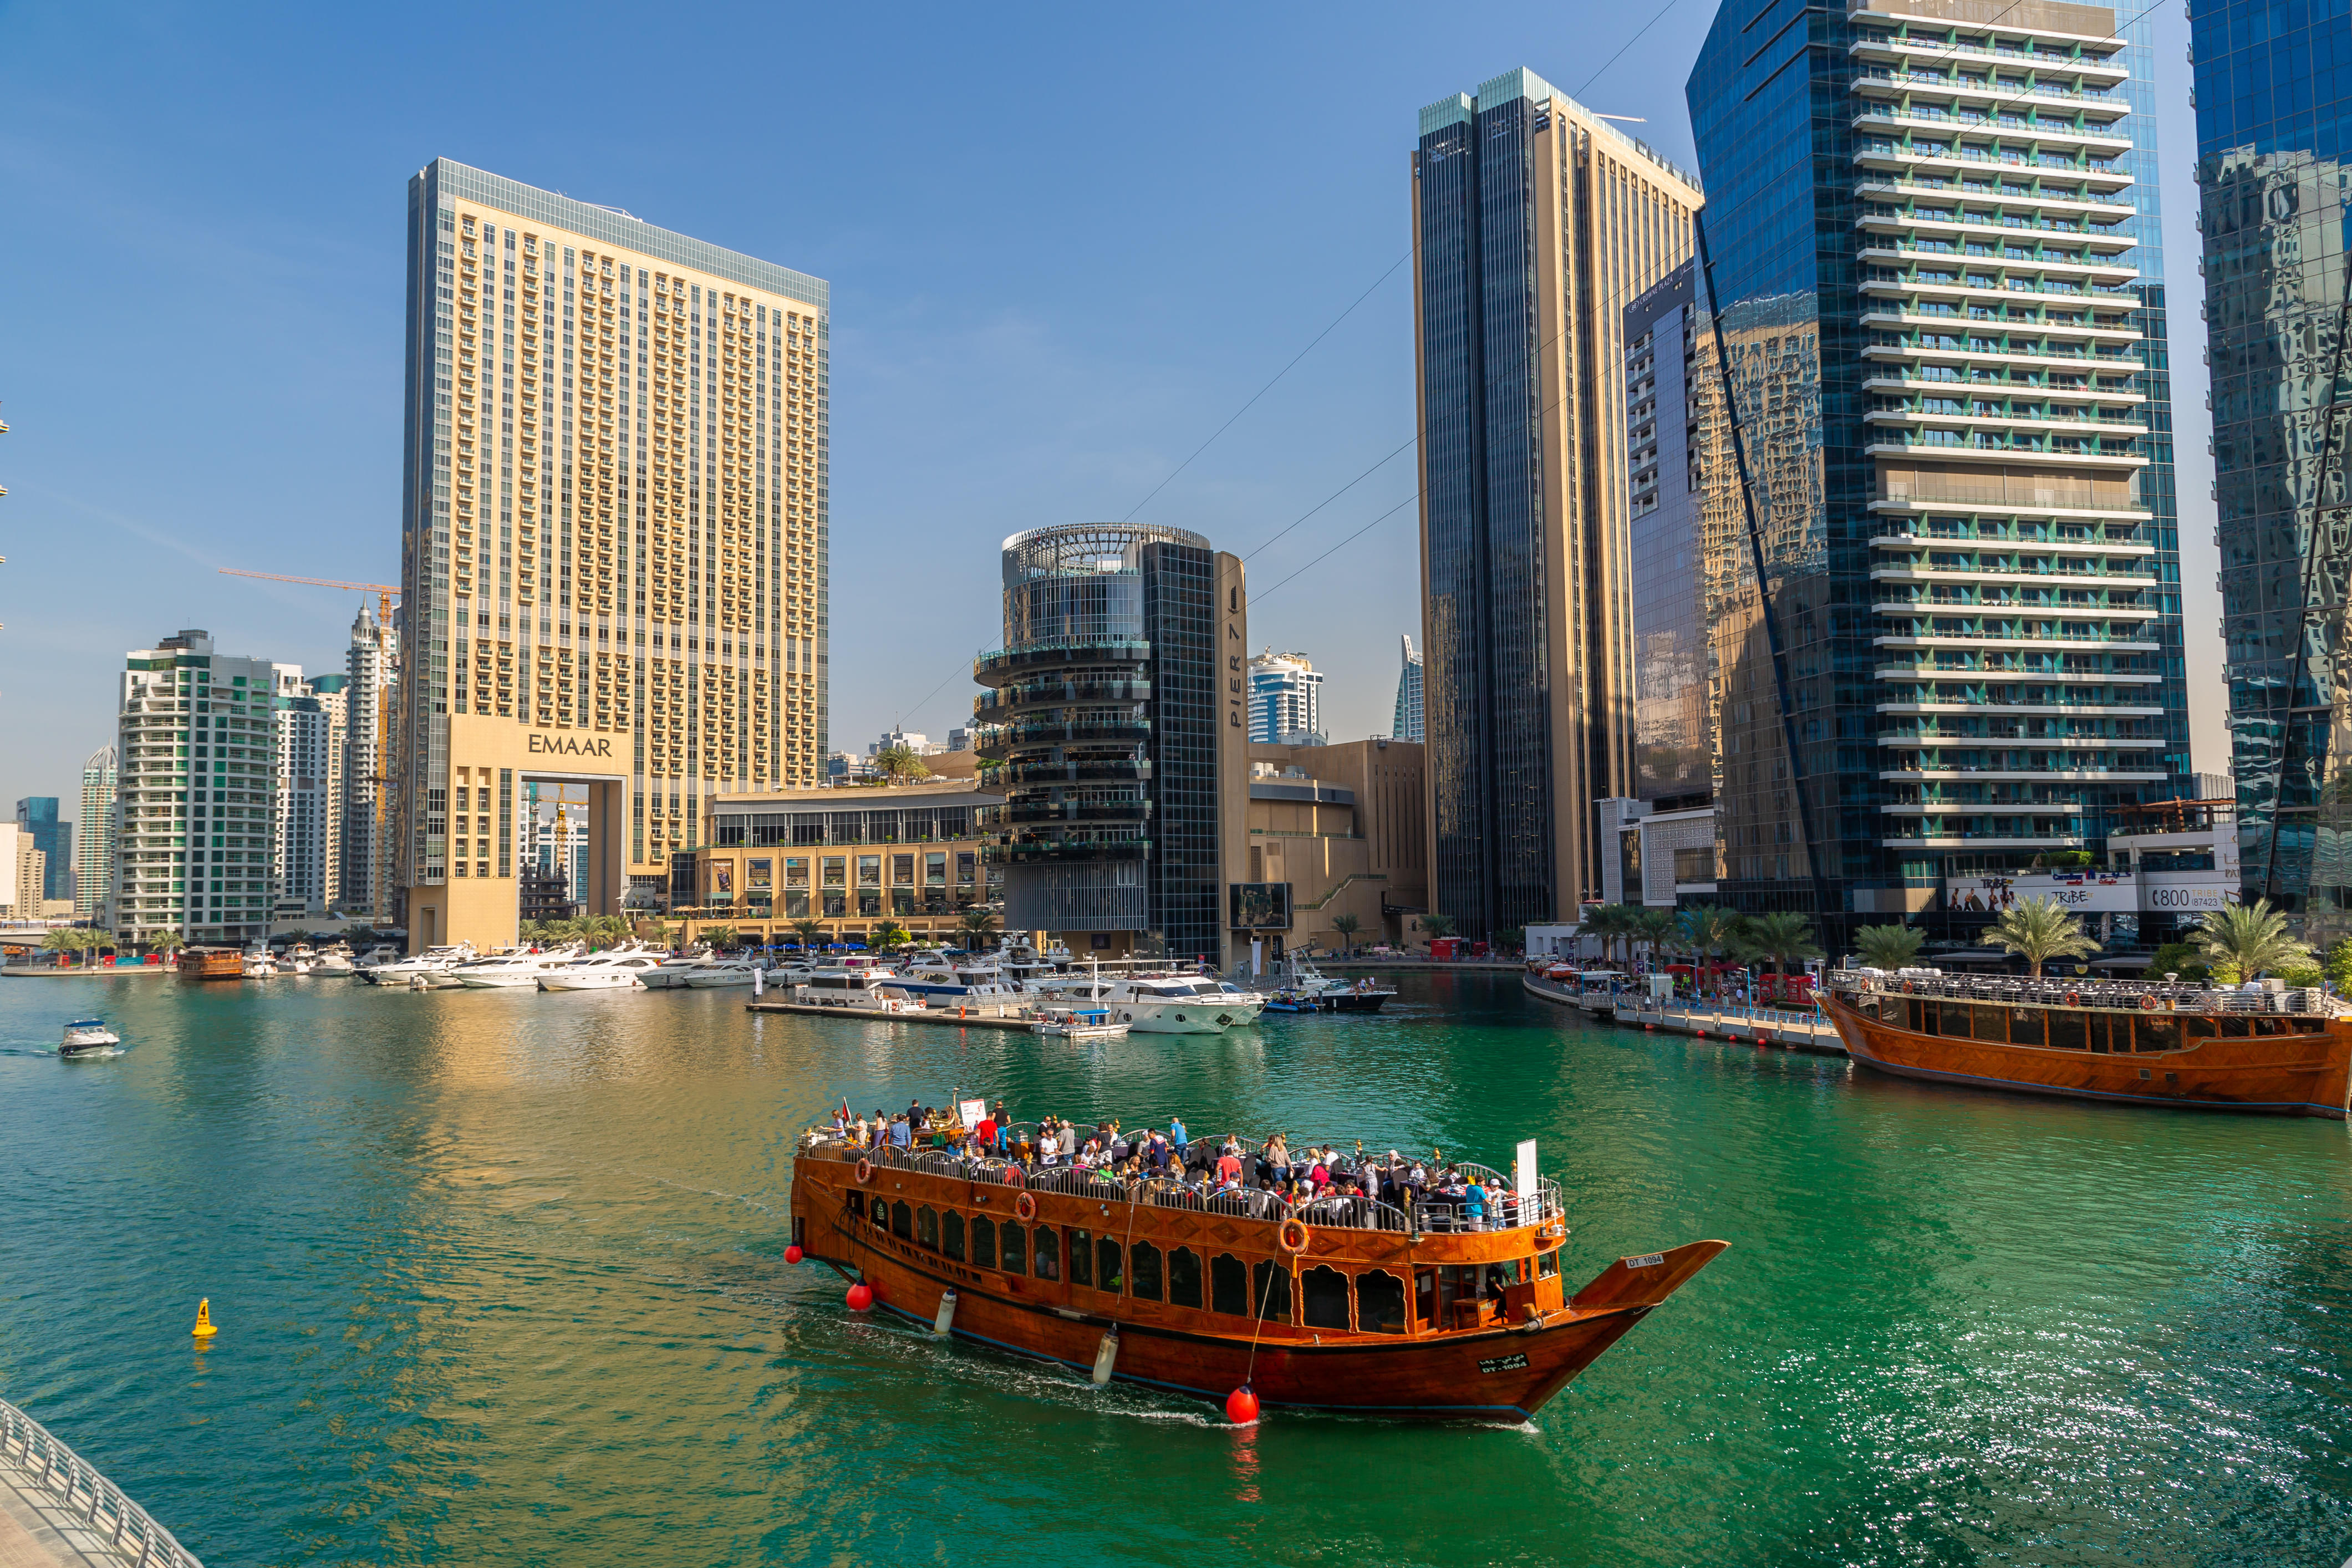 Sail, Thrill, and Make Memories in Dhow Cruise and IMG World Dubai 